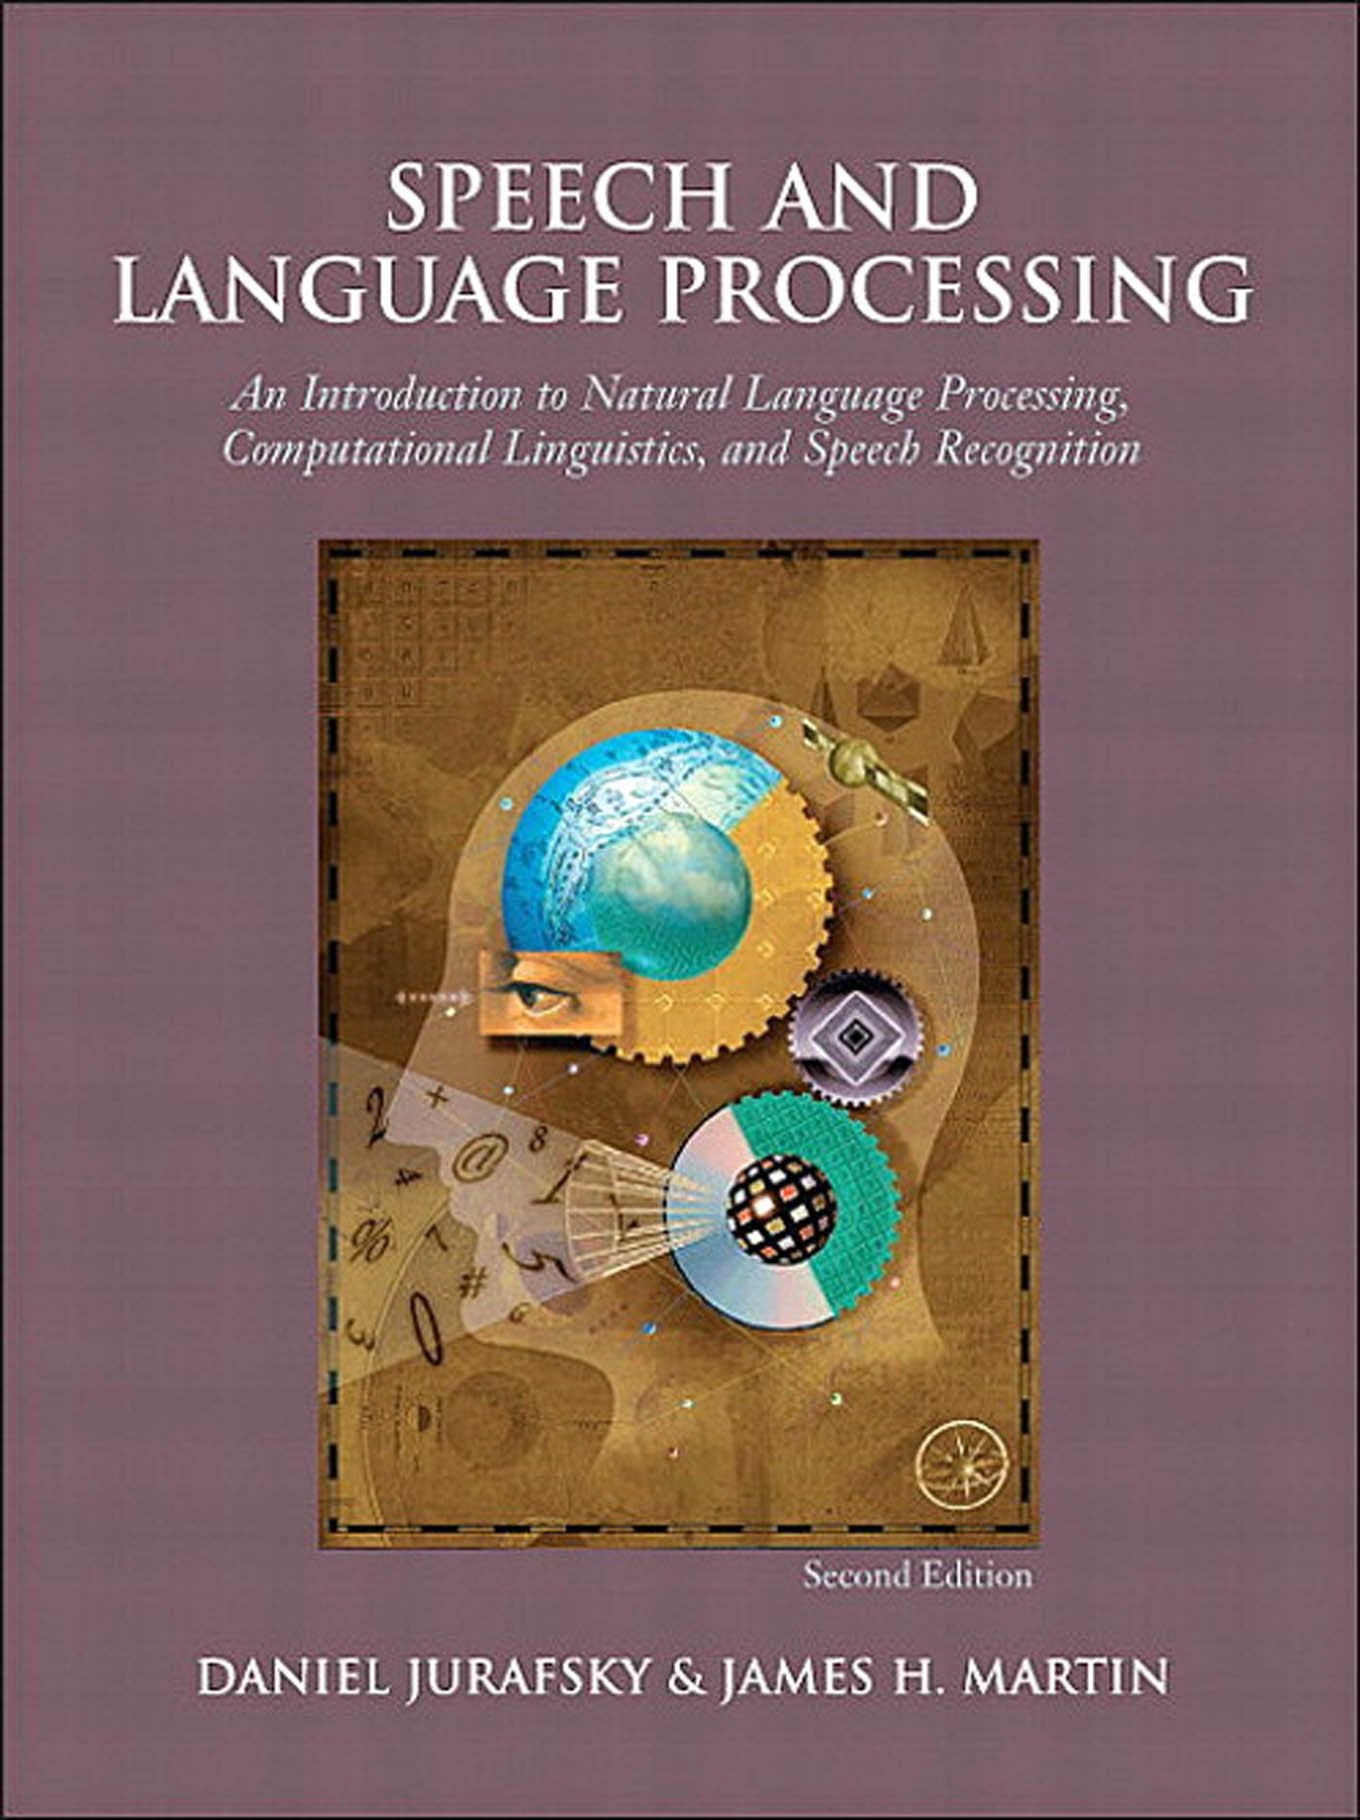 Speech and Language Processing: An Introduction to Natural Language Processing, Computational Linguistics, and Speech Recognition